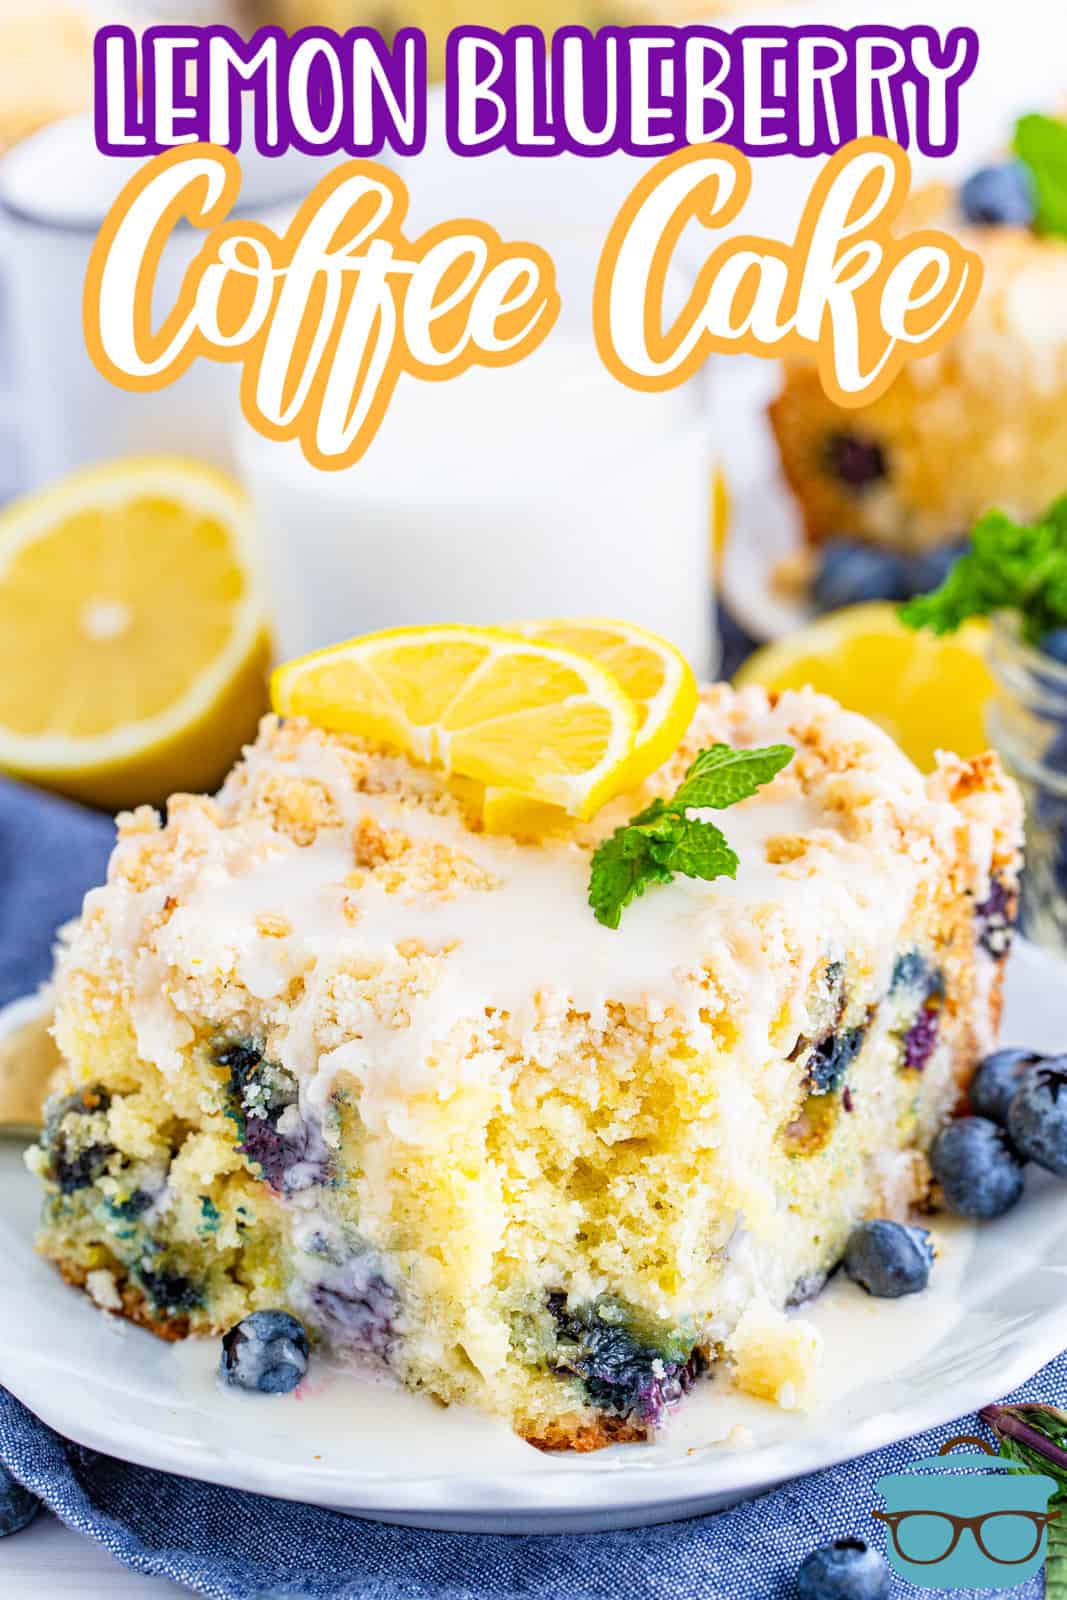 Pinterest image of slice of Lemon Blueberry Coffee Cake on plate with bite taken out.